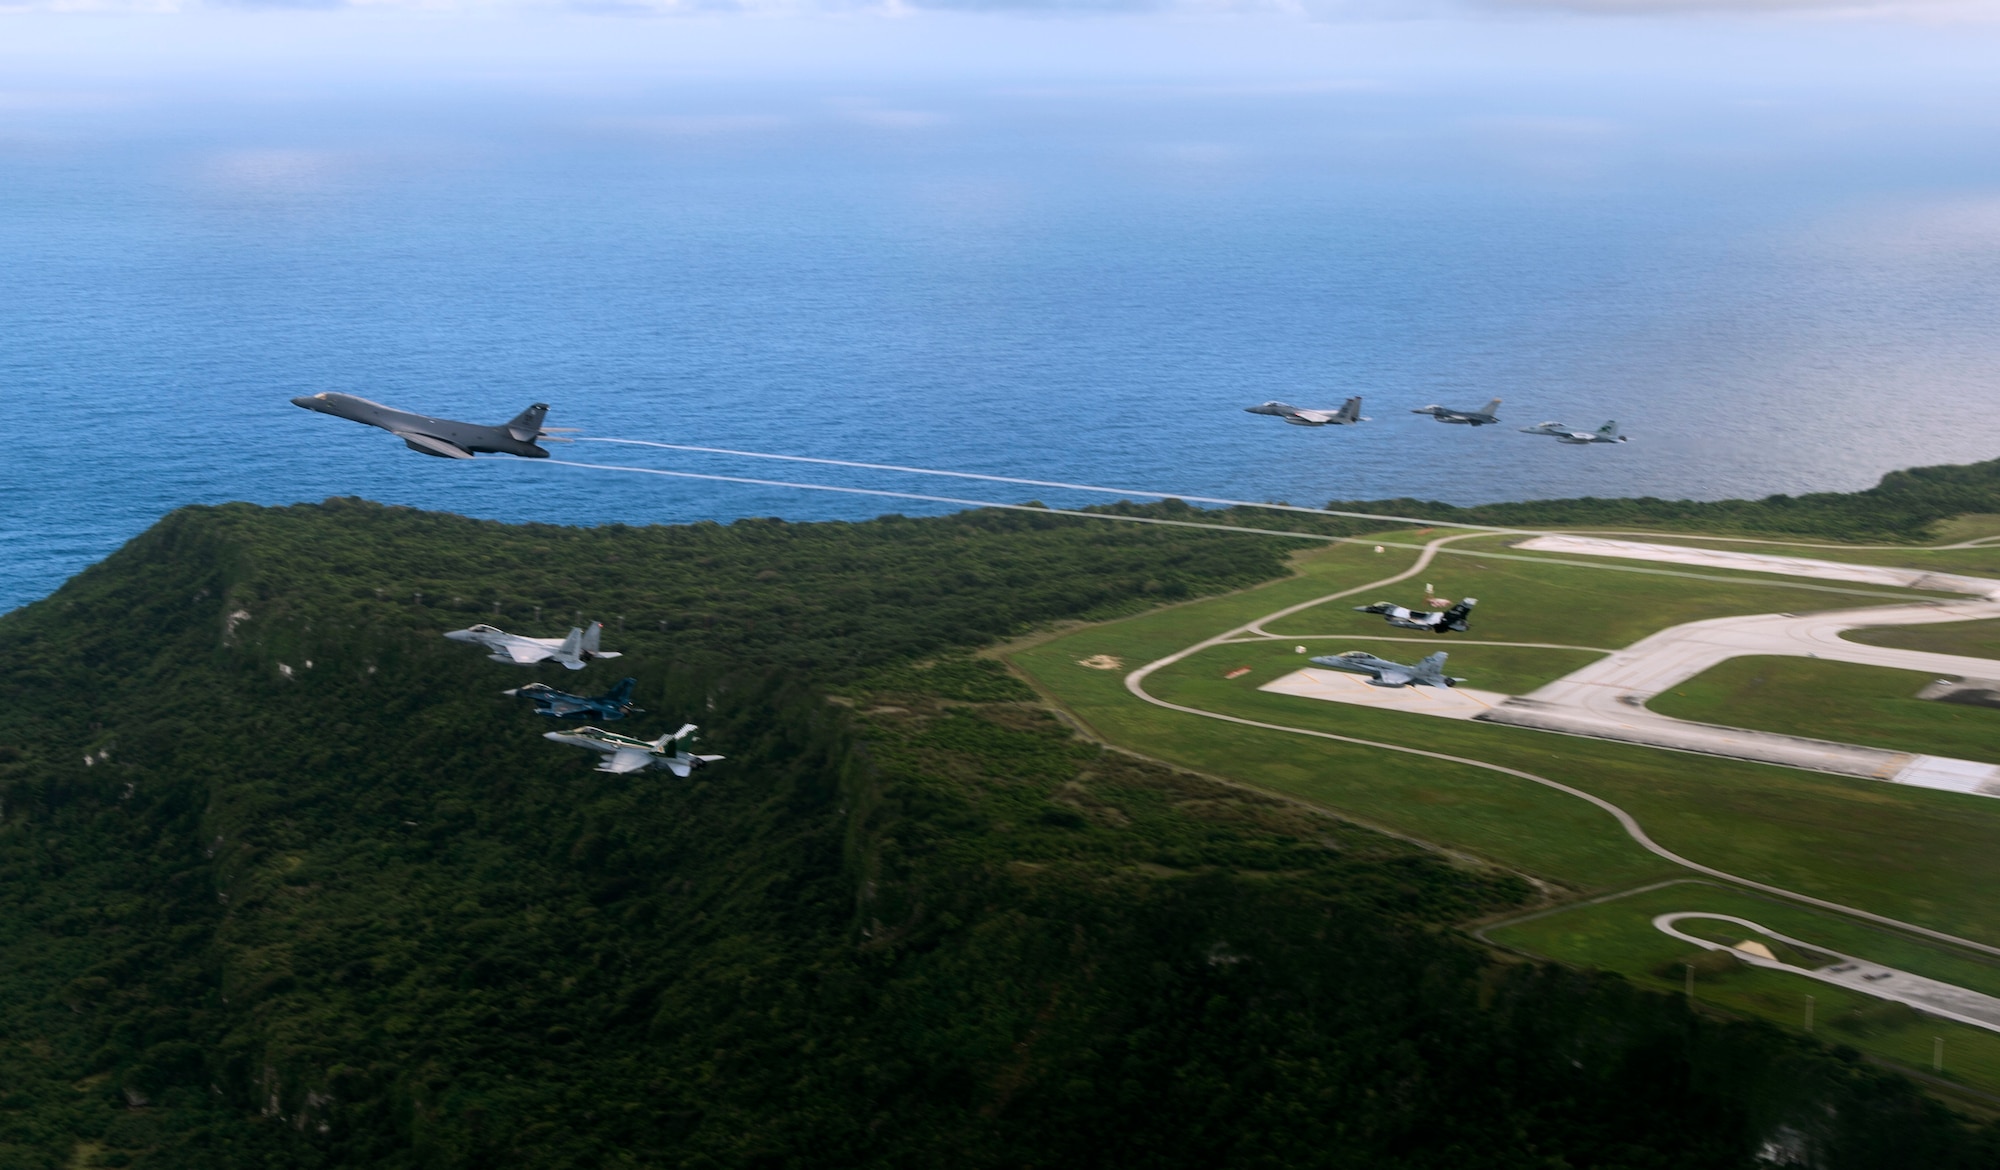 Aircraft from the United States, Japanese and Australian air forces fly in formation during exercise Cope North 2017 off the coast of Guam, Feb. 21, 2017. The exercise includes 22 total flying units and more than 2,700 personnel from three countries and continues the growth of strong, interoperable relationships within the Indo-Asia Pacific Region through integration of airborne and land-based command and control assets. (U.S. Air Force photo/Staff Sgt. Aaron Richardson)